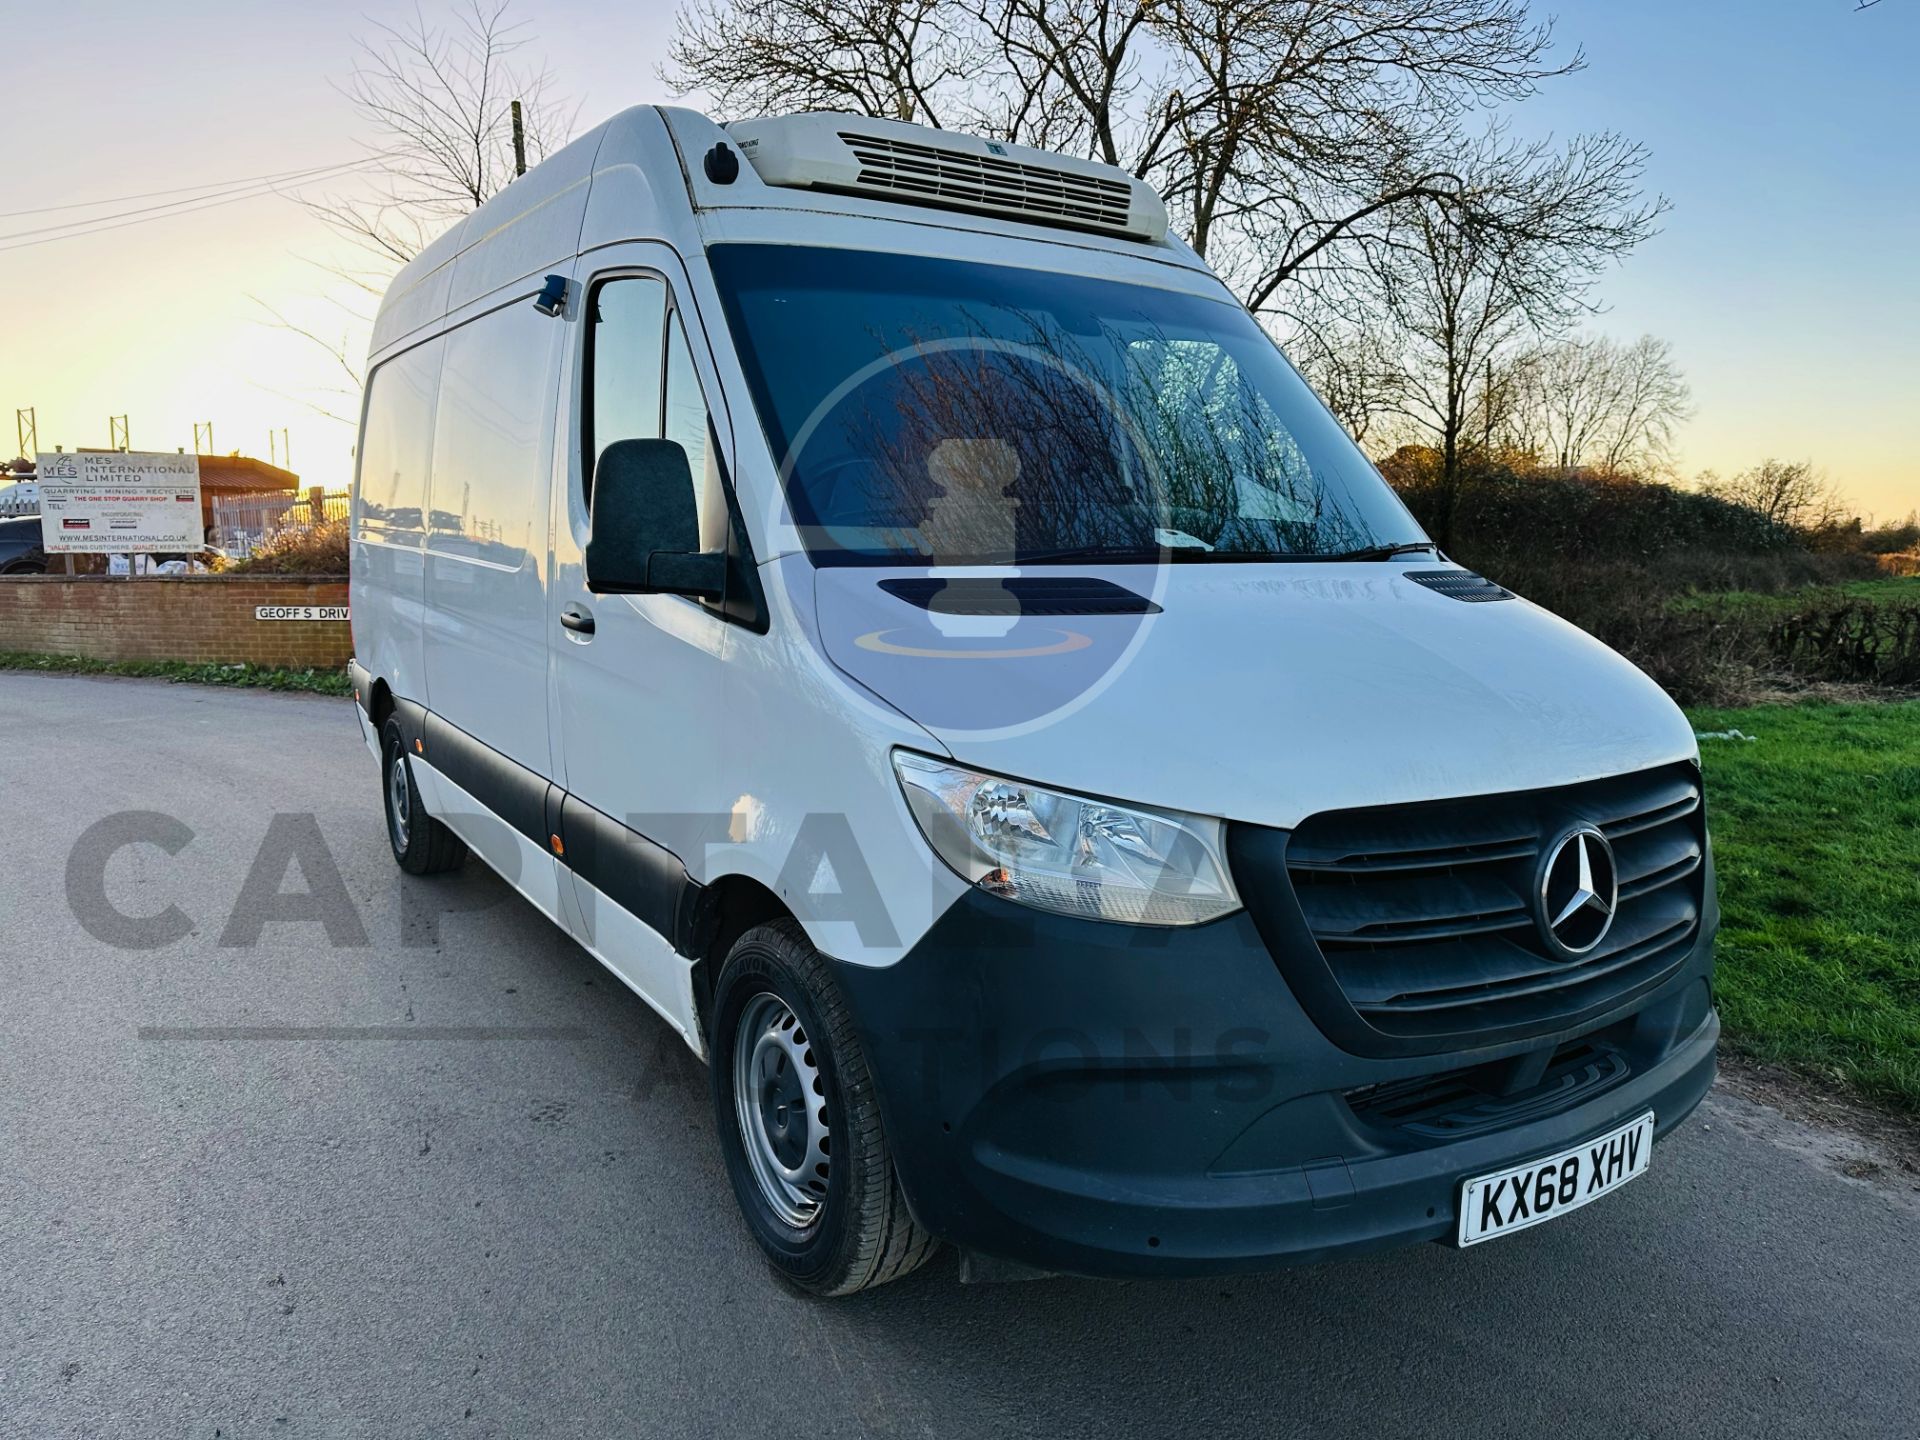 MERCEDES-BENZ SPRINTER 314 CDI *MWB - REFRIGERATED VAN* (2019 - FACELIFT MODEL) *OVERNIGHT STANDBY* - Image 2 of 32